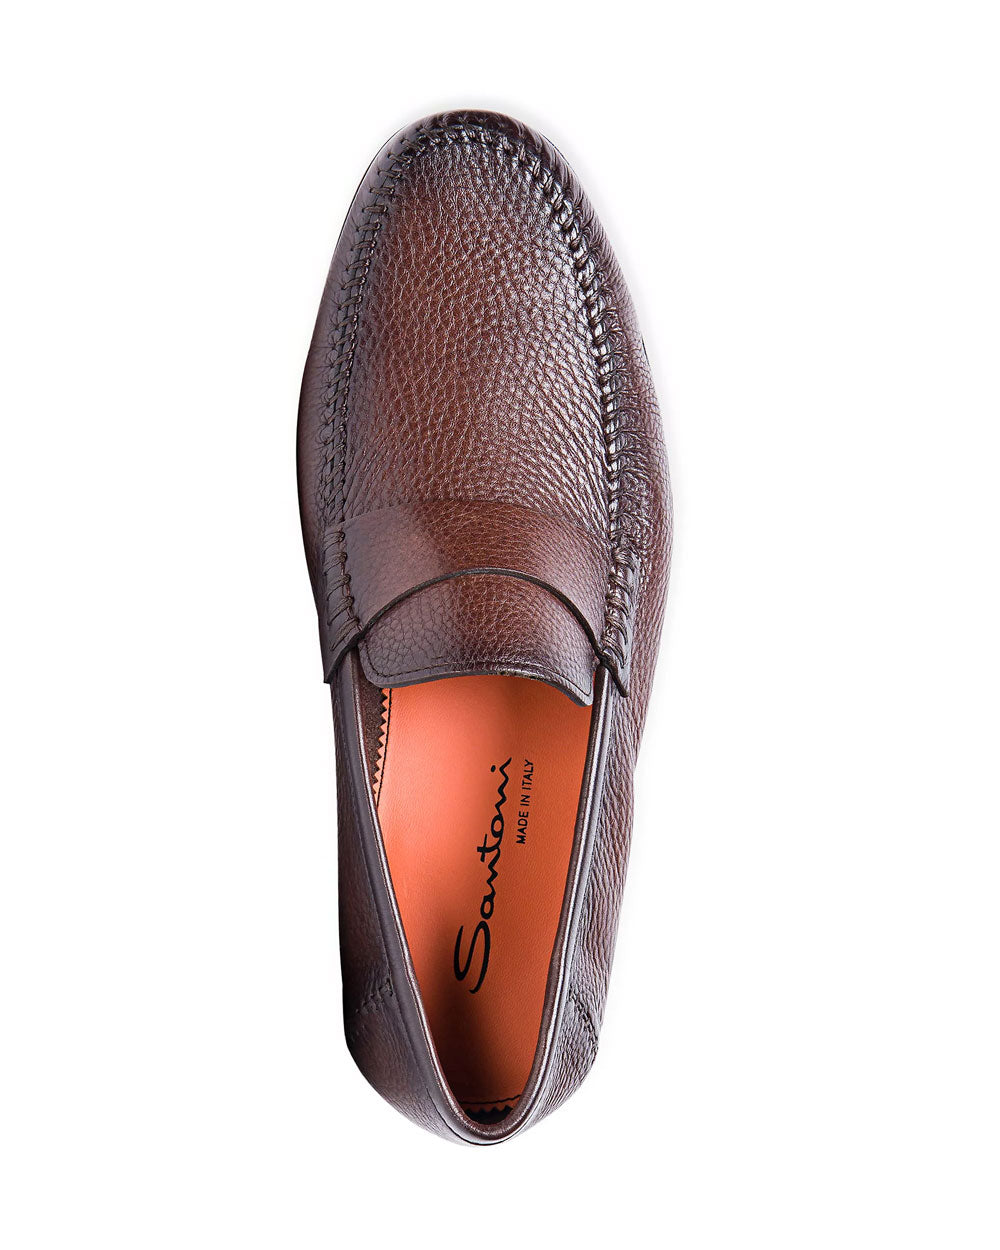 Paine Tumbled Leather Loafer in Dark Brown